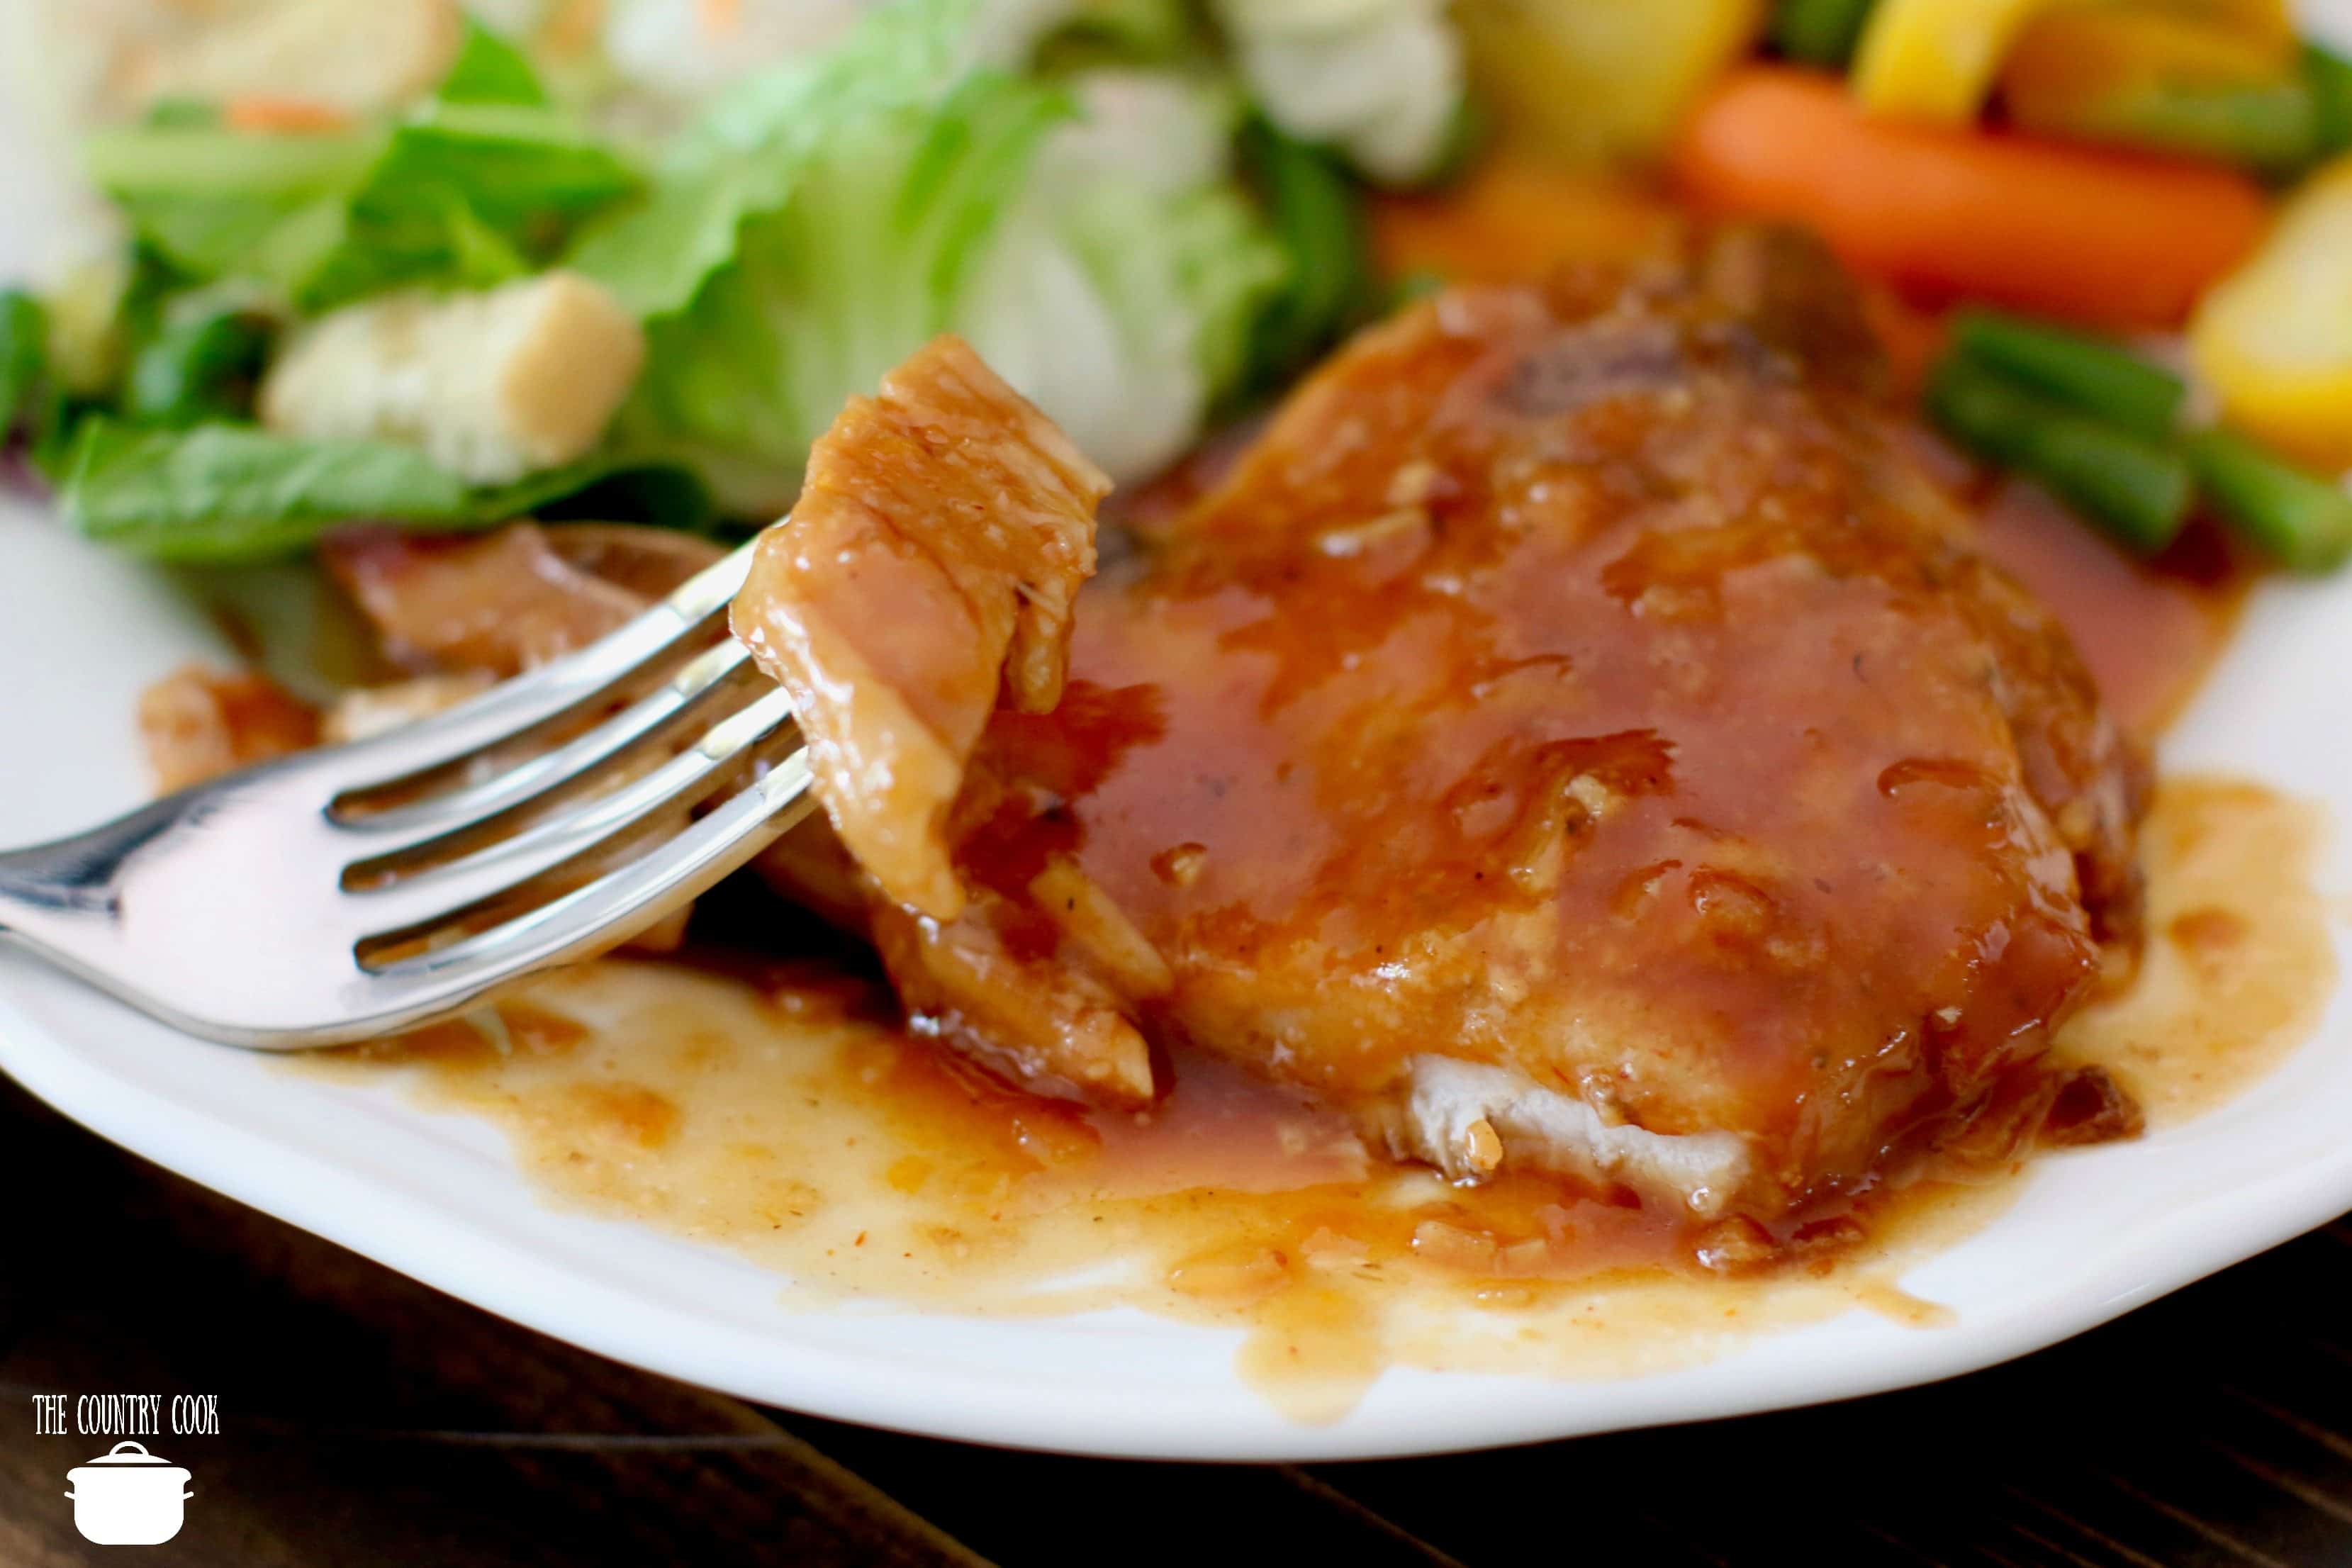 Fork shown holding up a slice of BBQ pork chops on a white plate with a salad and vegetables in the background.